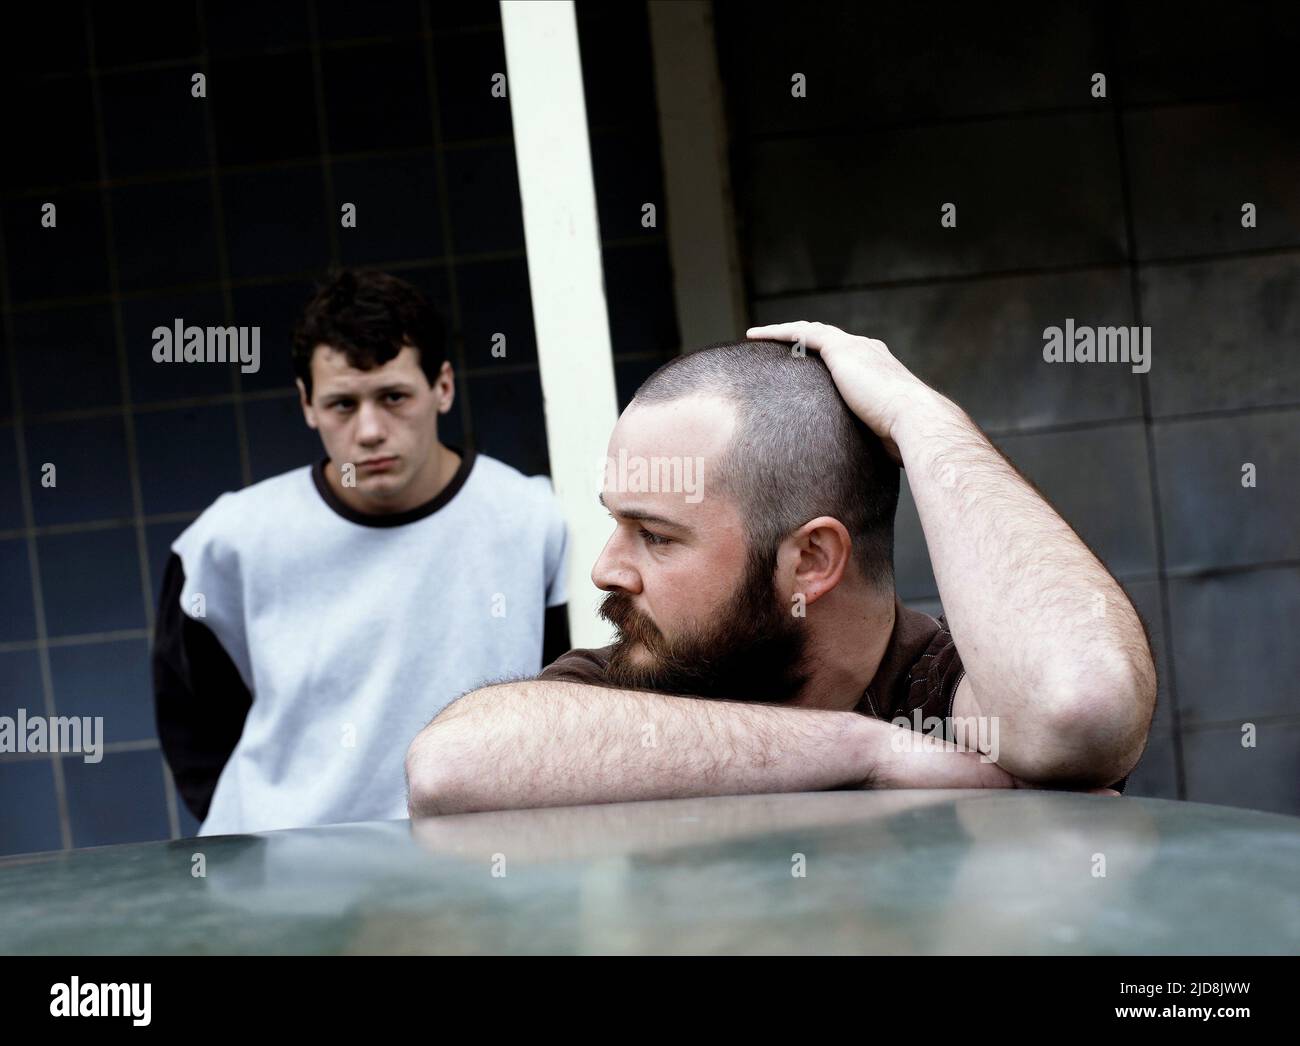 PITTAWAY, HENSHALL, SNOWTOWN, 2011, Banque D'Images